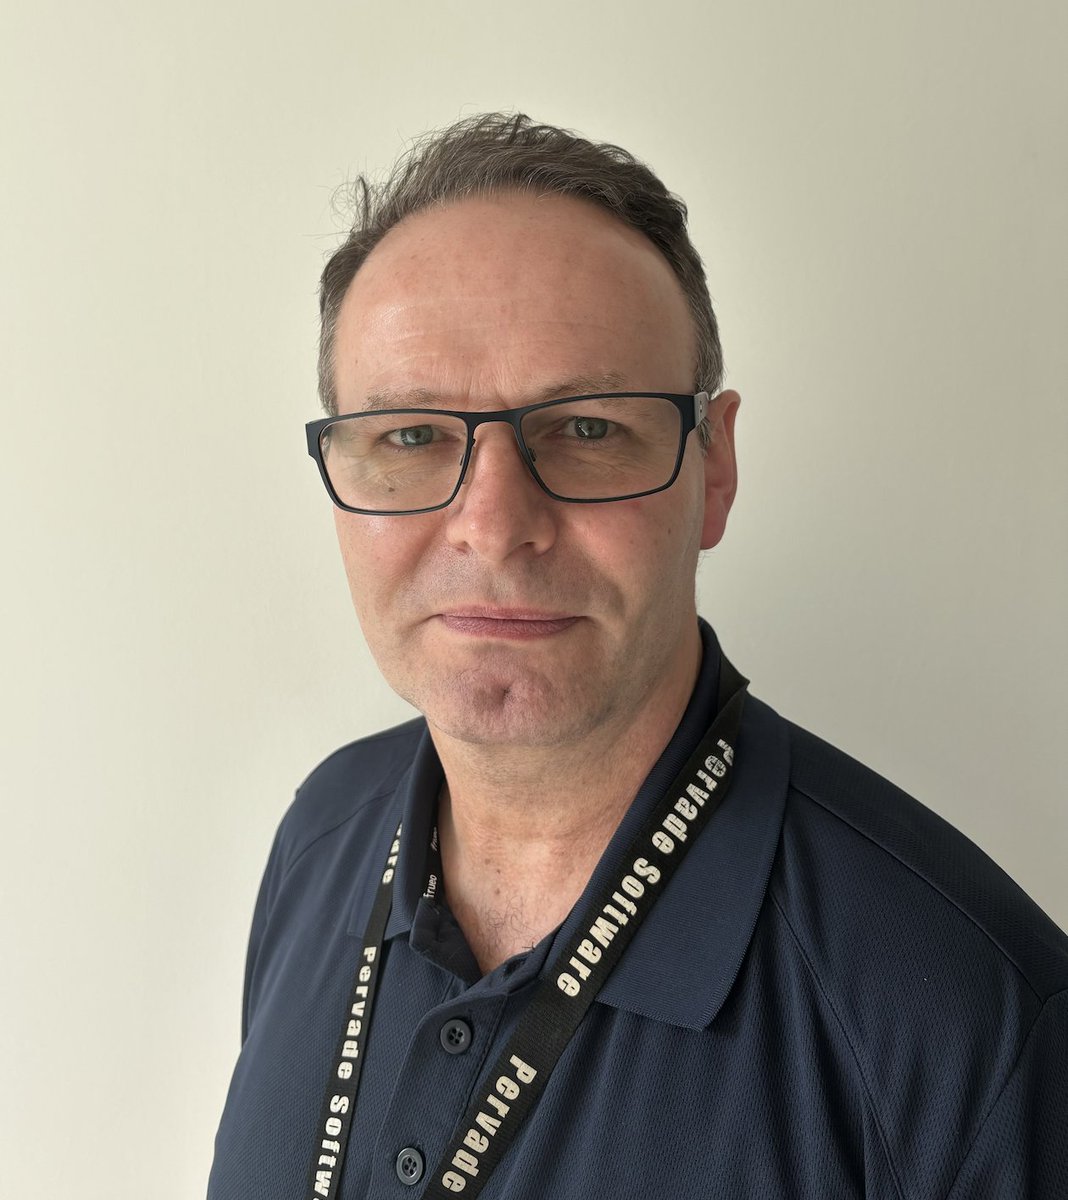 🌟Exciting News🌟
This week we welcomed Neil to the Pervade team! Neil steps into the role of Senior Support Engineer with 20+ yrs of technical support experience under his belt. He’ll be a vital asset to our Police CyberAlarm support team & we're thrilled to have him on board!